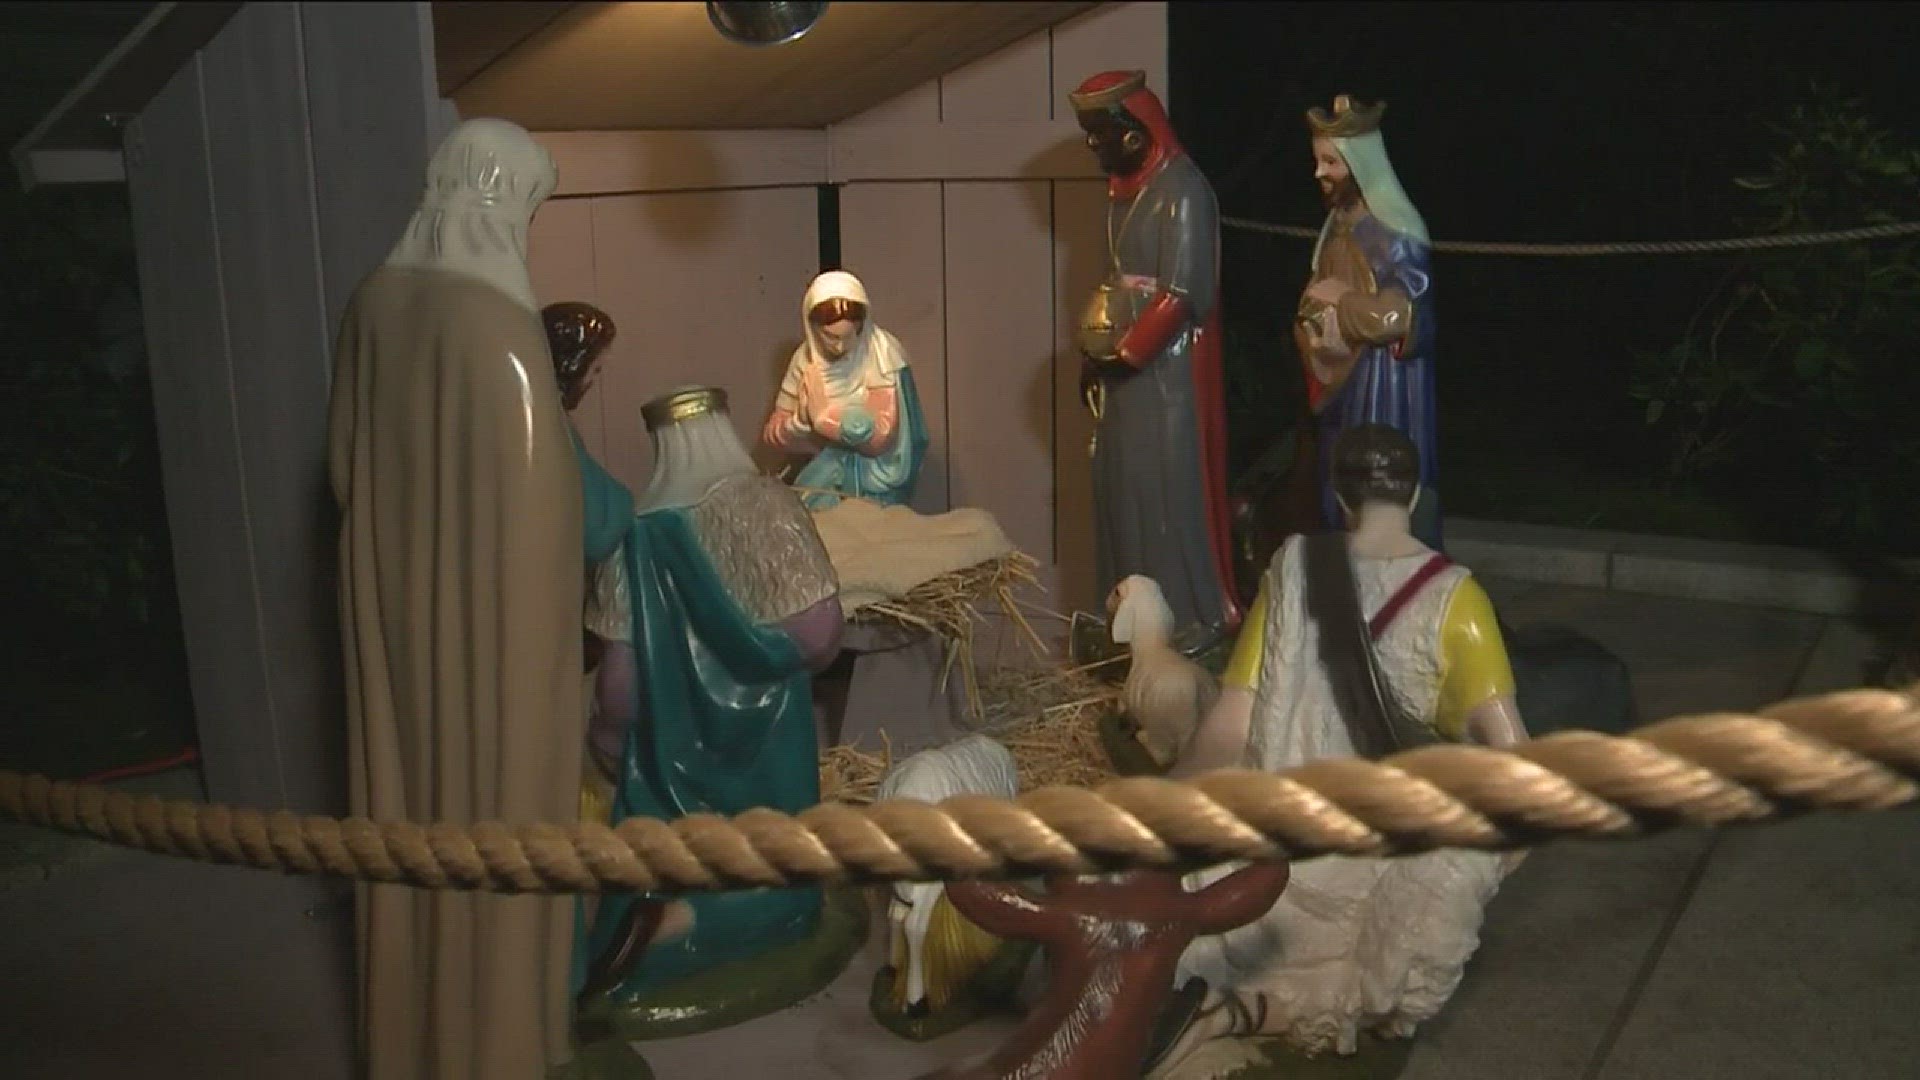 For the first time in 40 years, there is a nativity scene at the State Capitol. (Dec. 18, 2016)